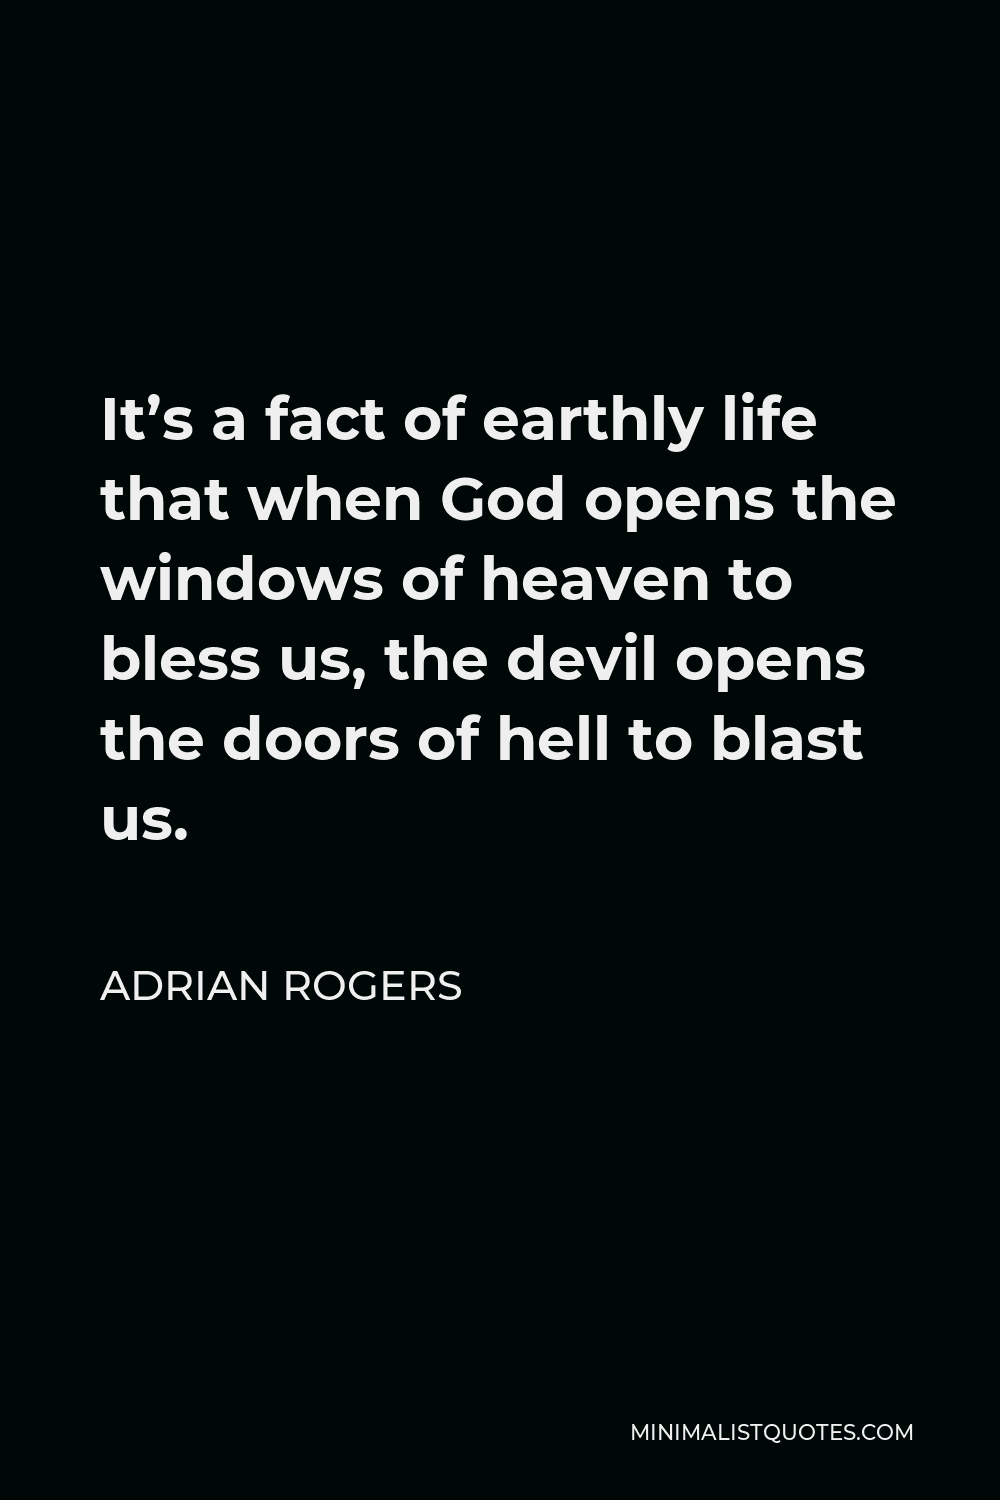 Adrian Rogers Quote - It’s a fact of earthly life that when God opens the windows of heaven to bless us, the devil opens the doors of hell to blast us.